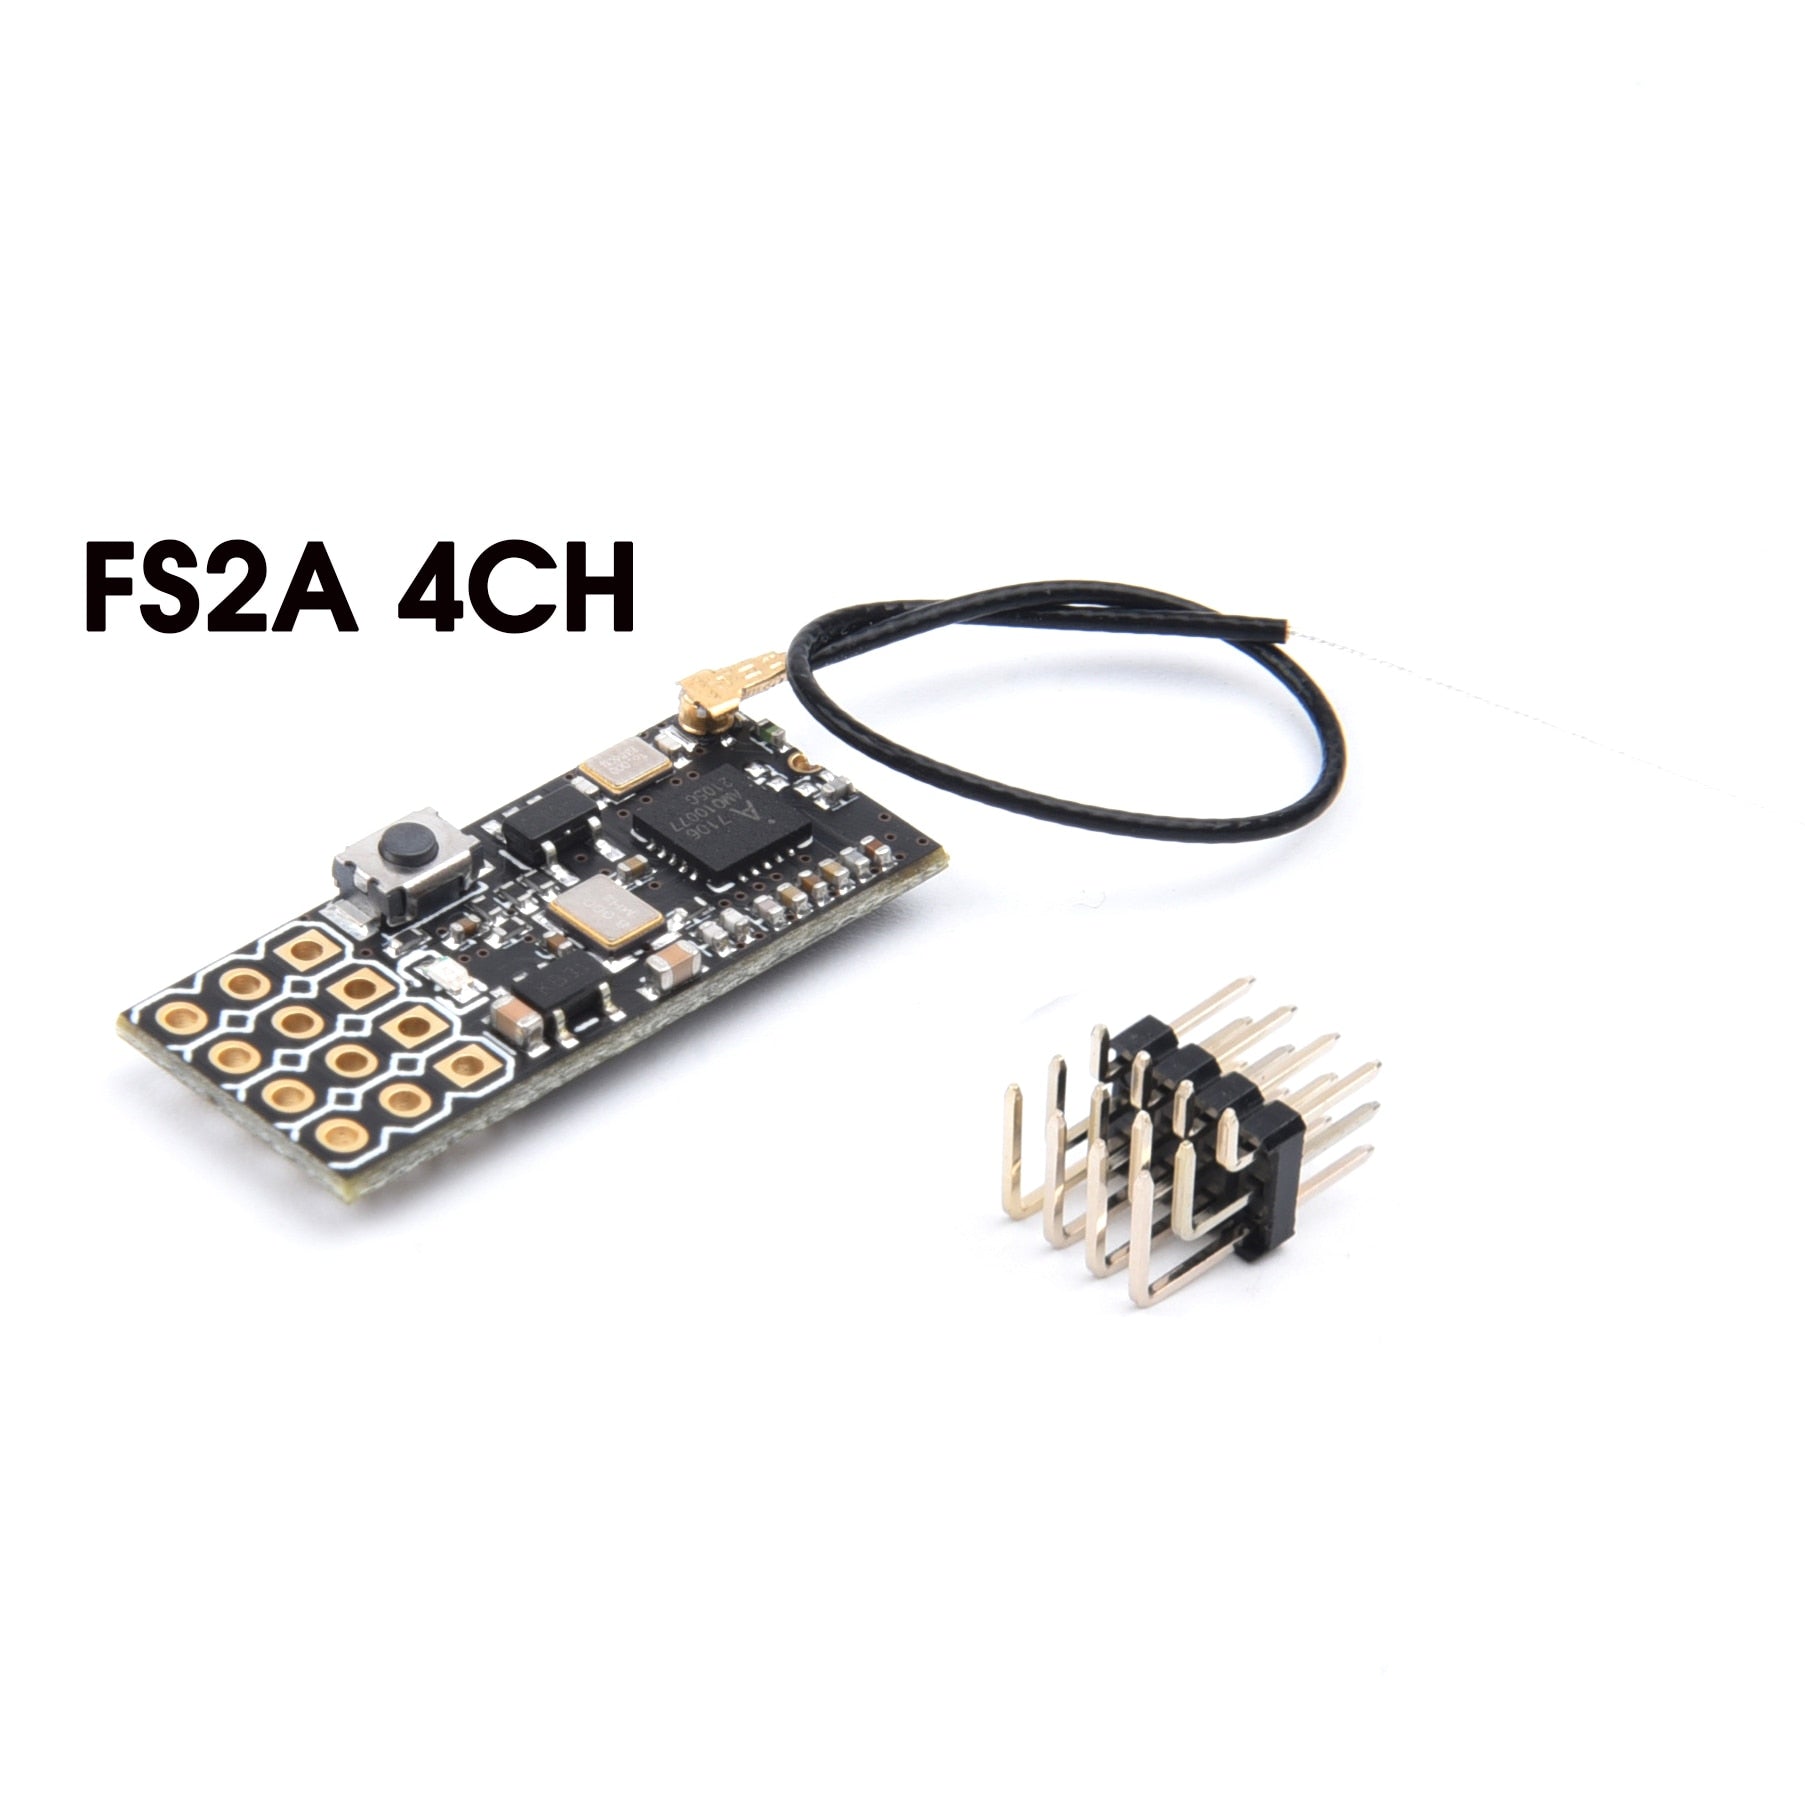 iA6B X6B A8S R6B iA10B RX2A Fli14 Receiver Radio Controller for FLYSKY FS-i6 i6 2.4G 6CH AFHDS Transmitter RC FPV Drone Airplane